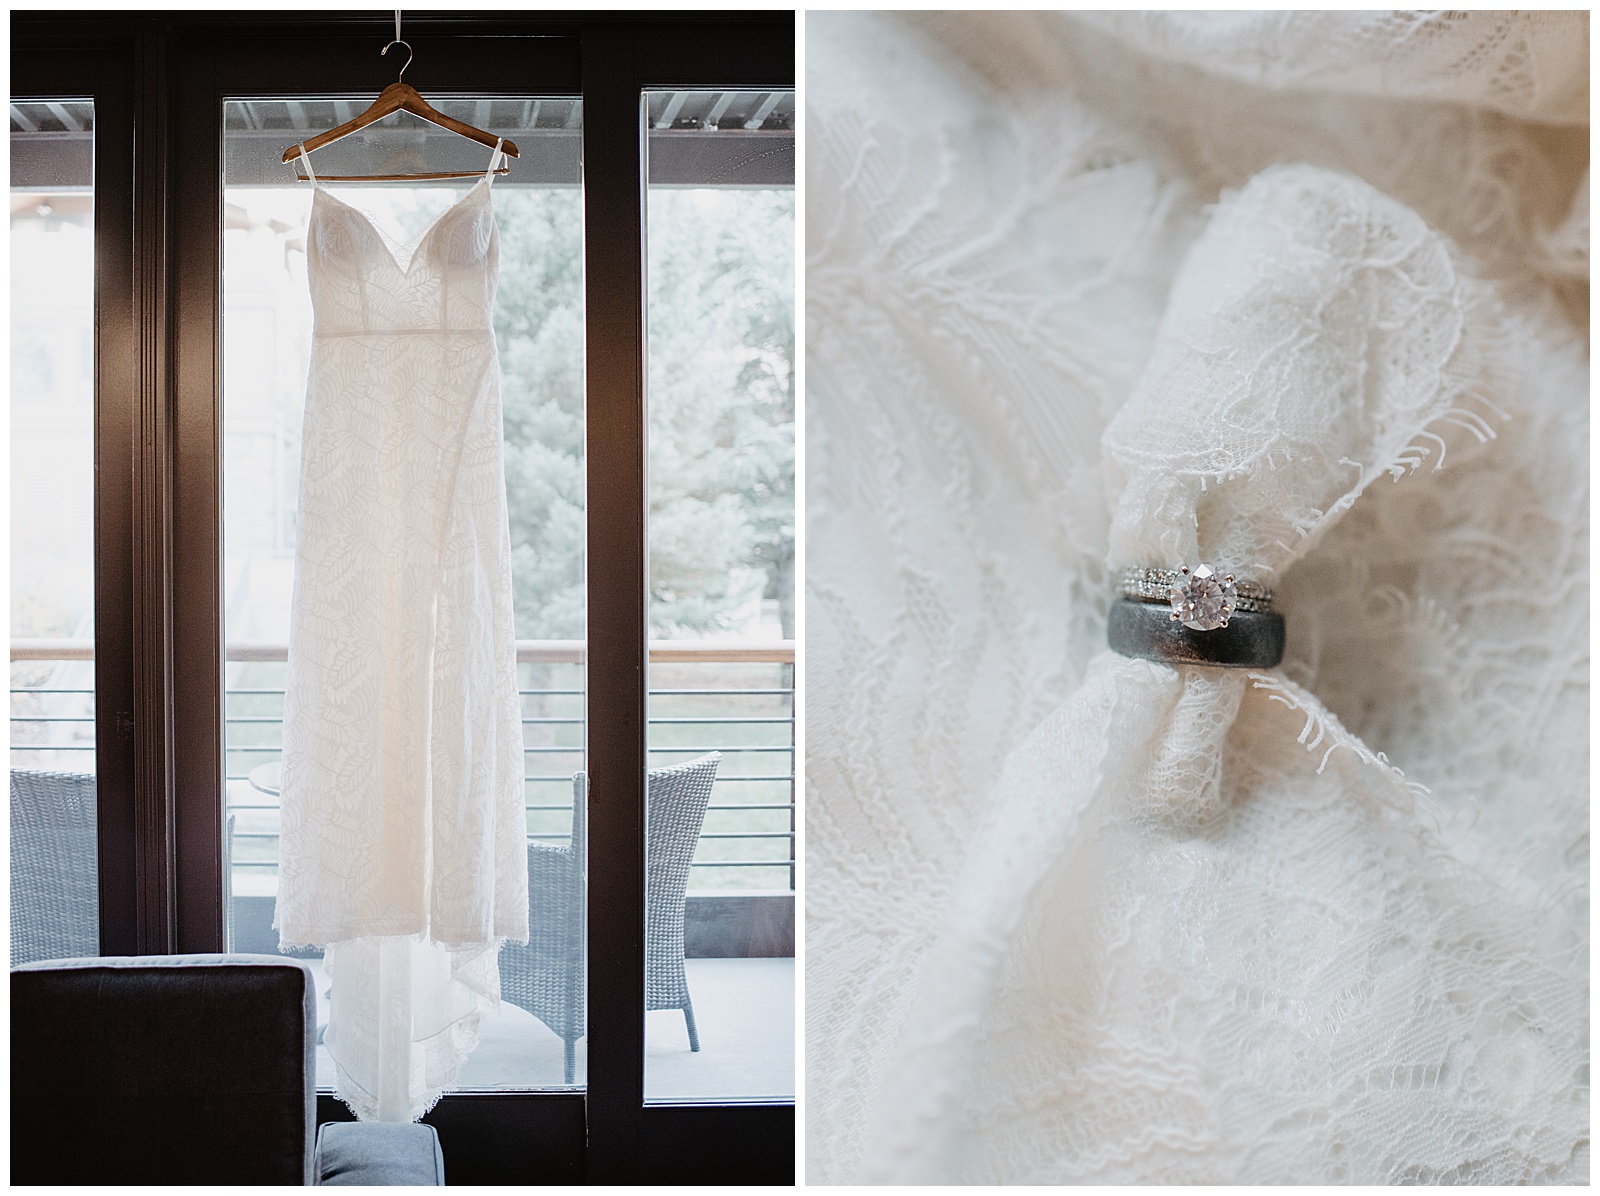 detail shot of the brides lace gown hanging in a bright window and the wedding rings against the lace of the gown